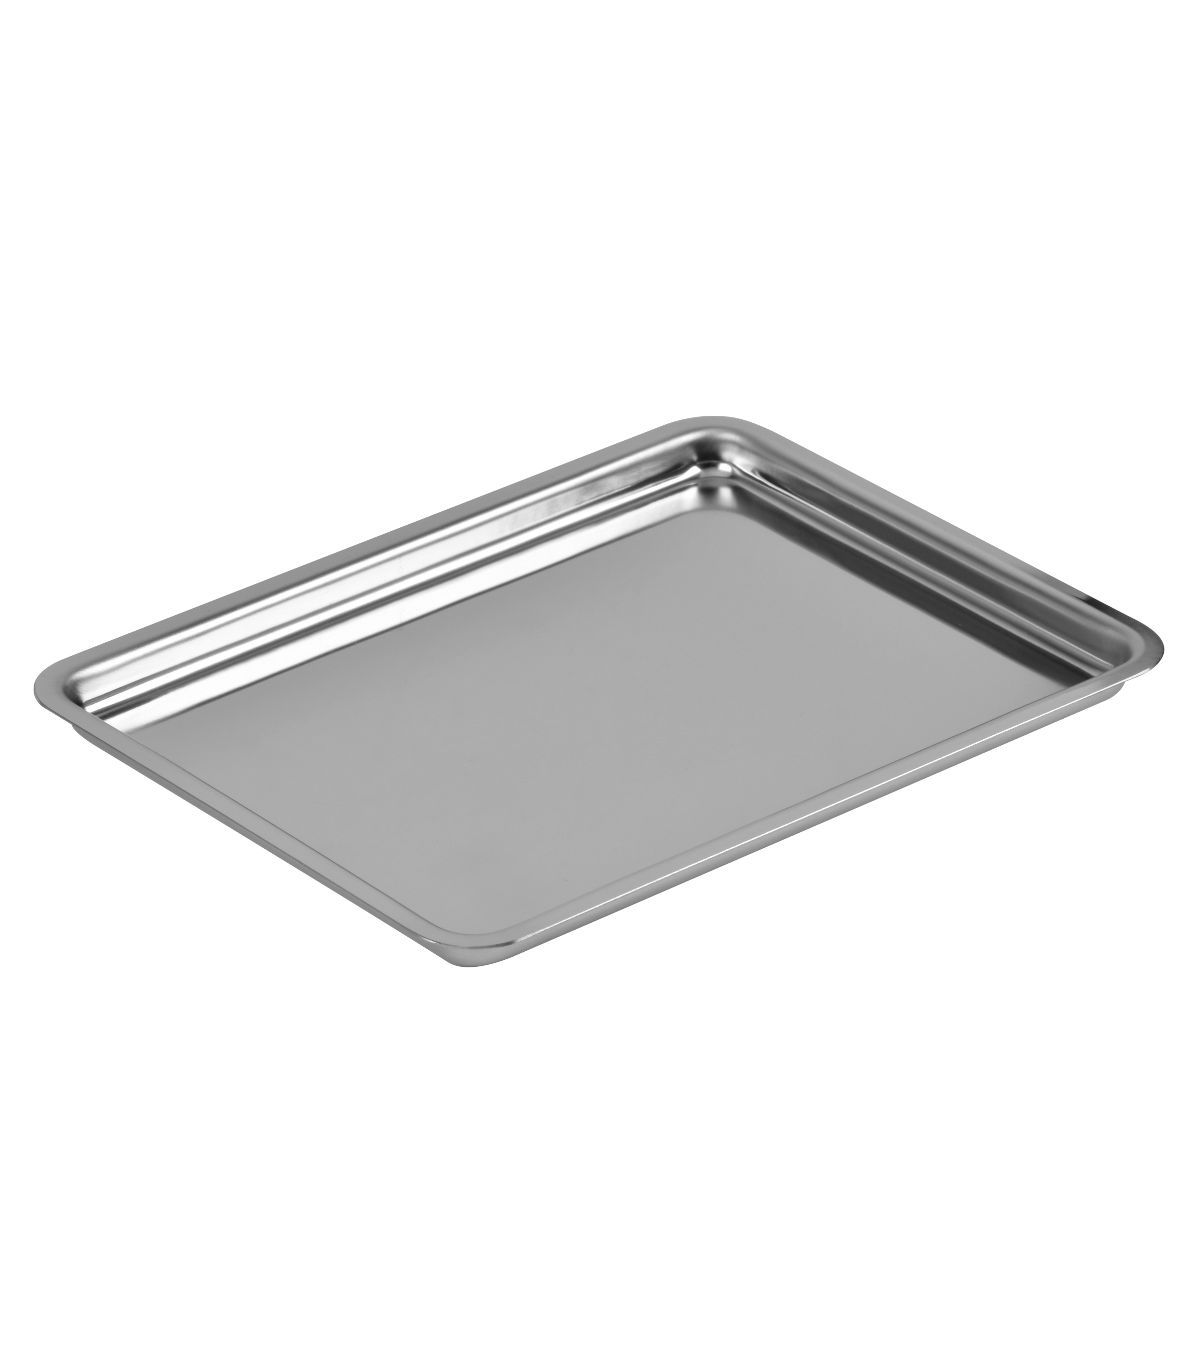 GN Container 2/3 H 10 cm stainless steel : Stellinox